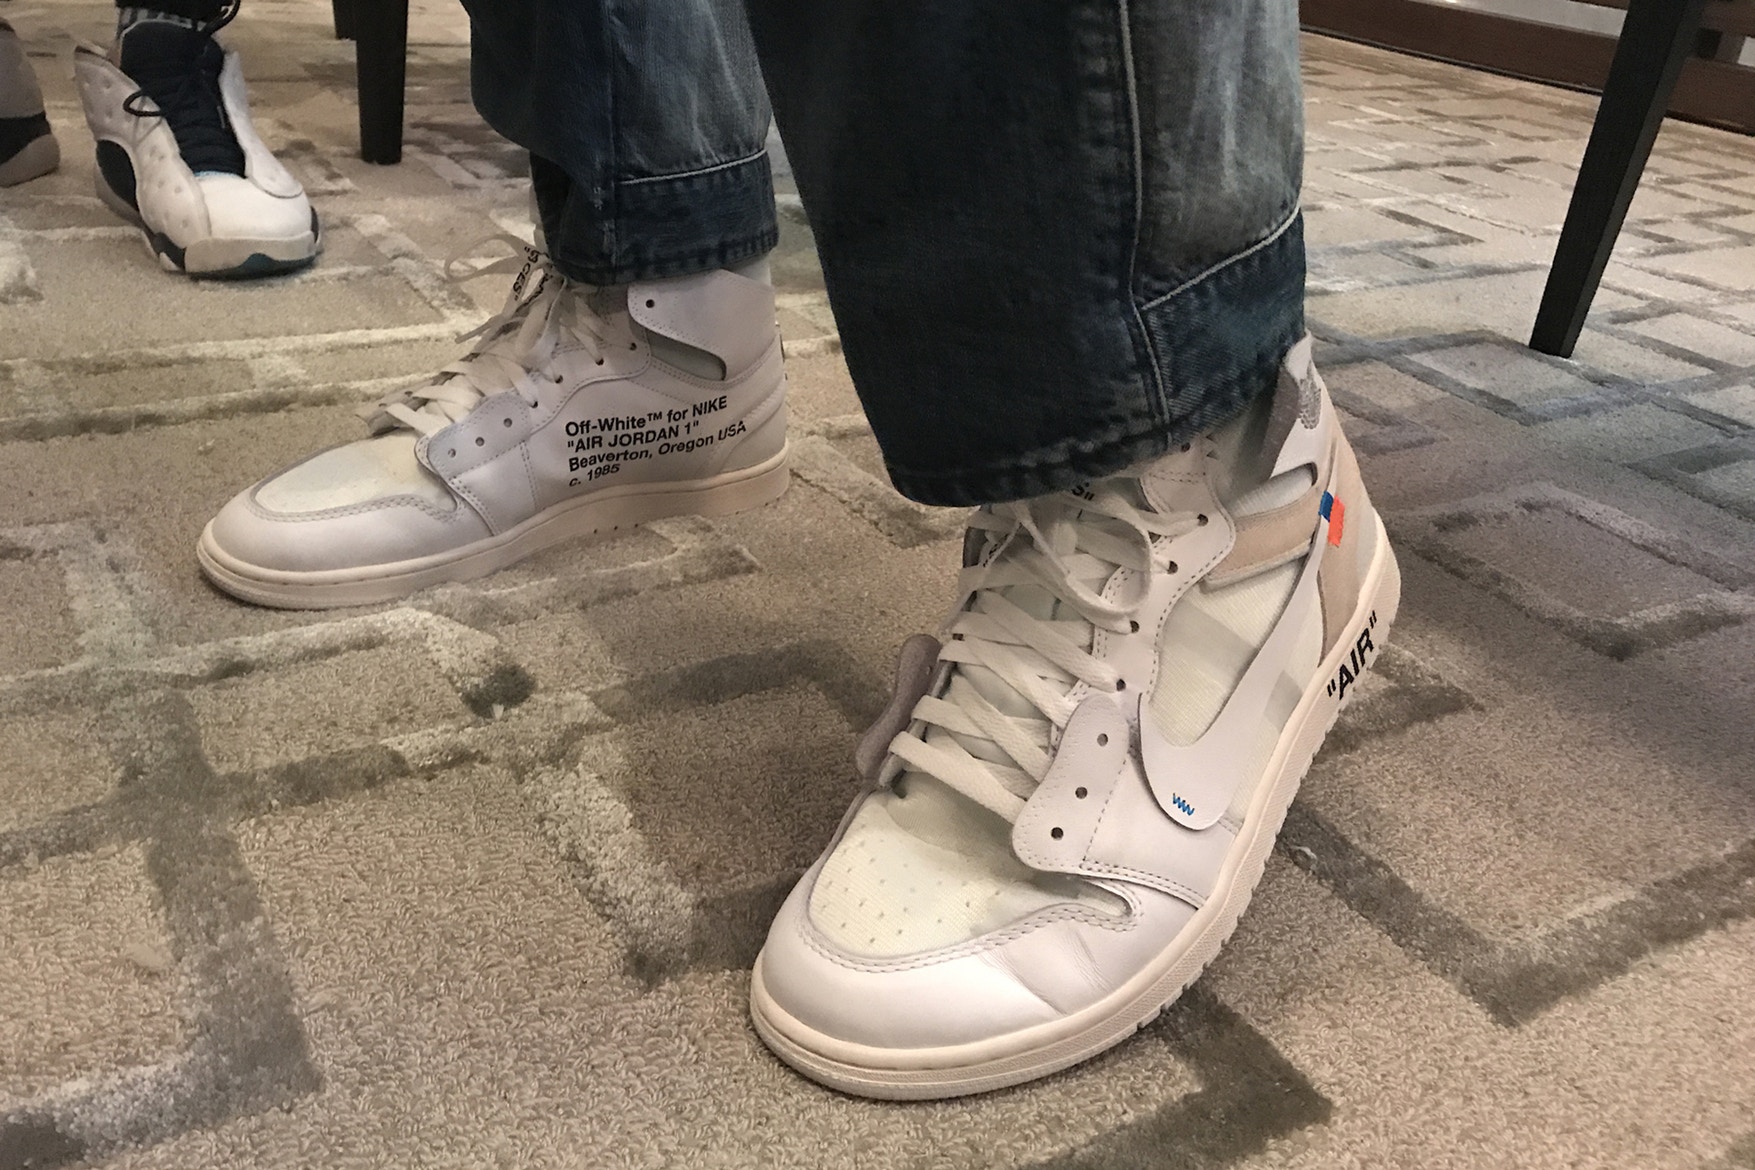 The Off-White x Air Jordan 1 Could Be Set to Receive a White Colourway